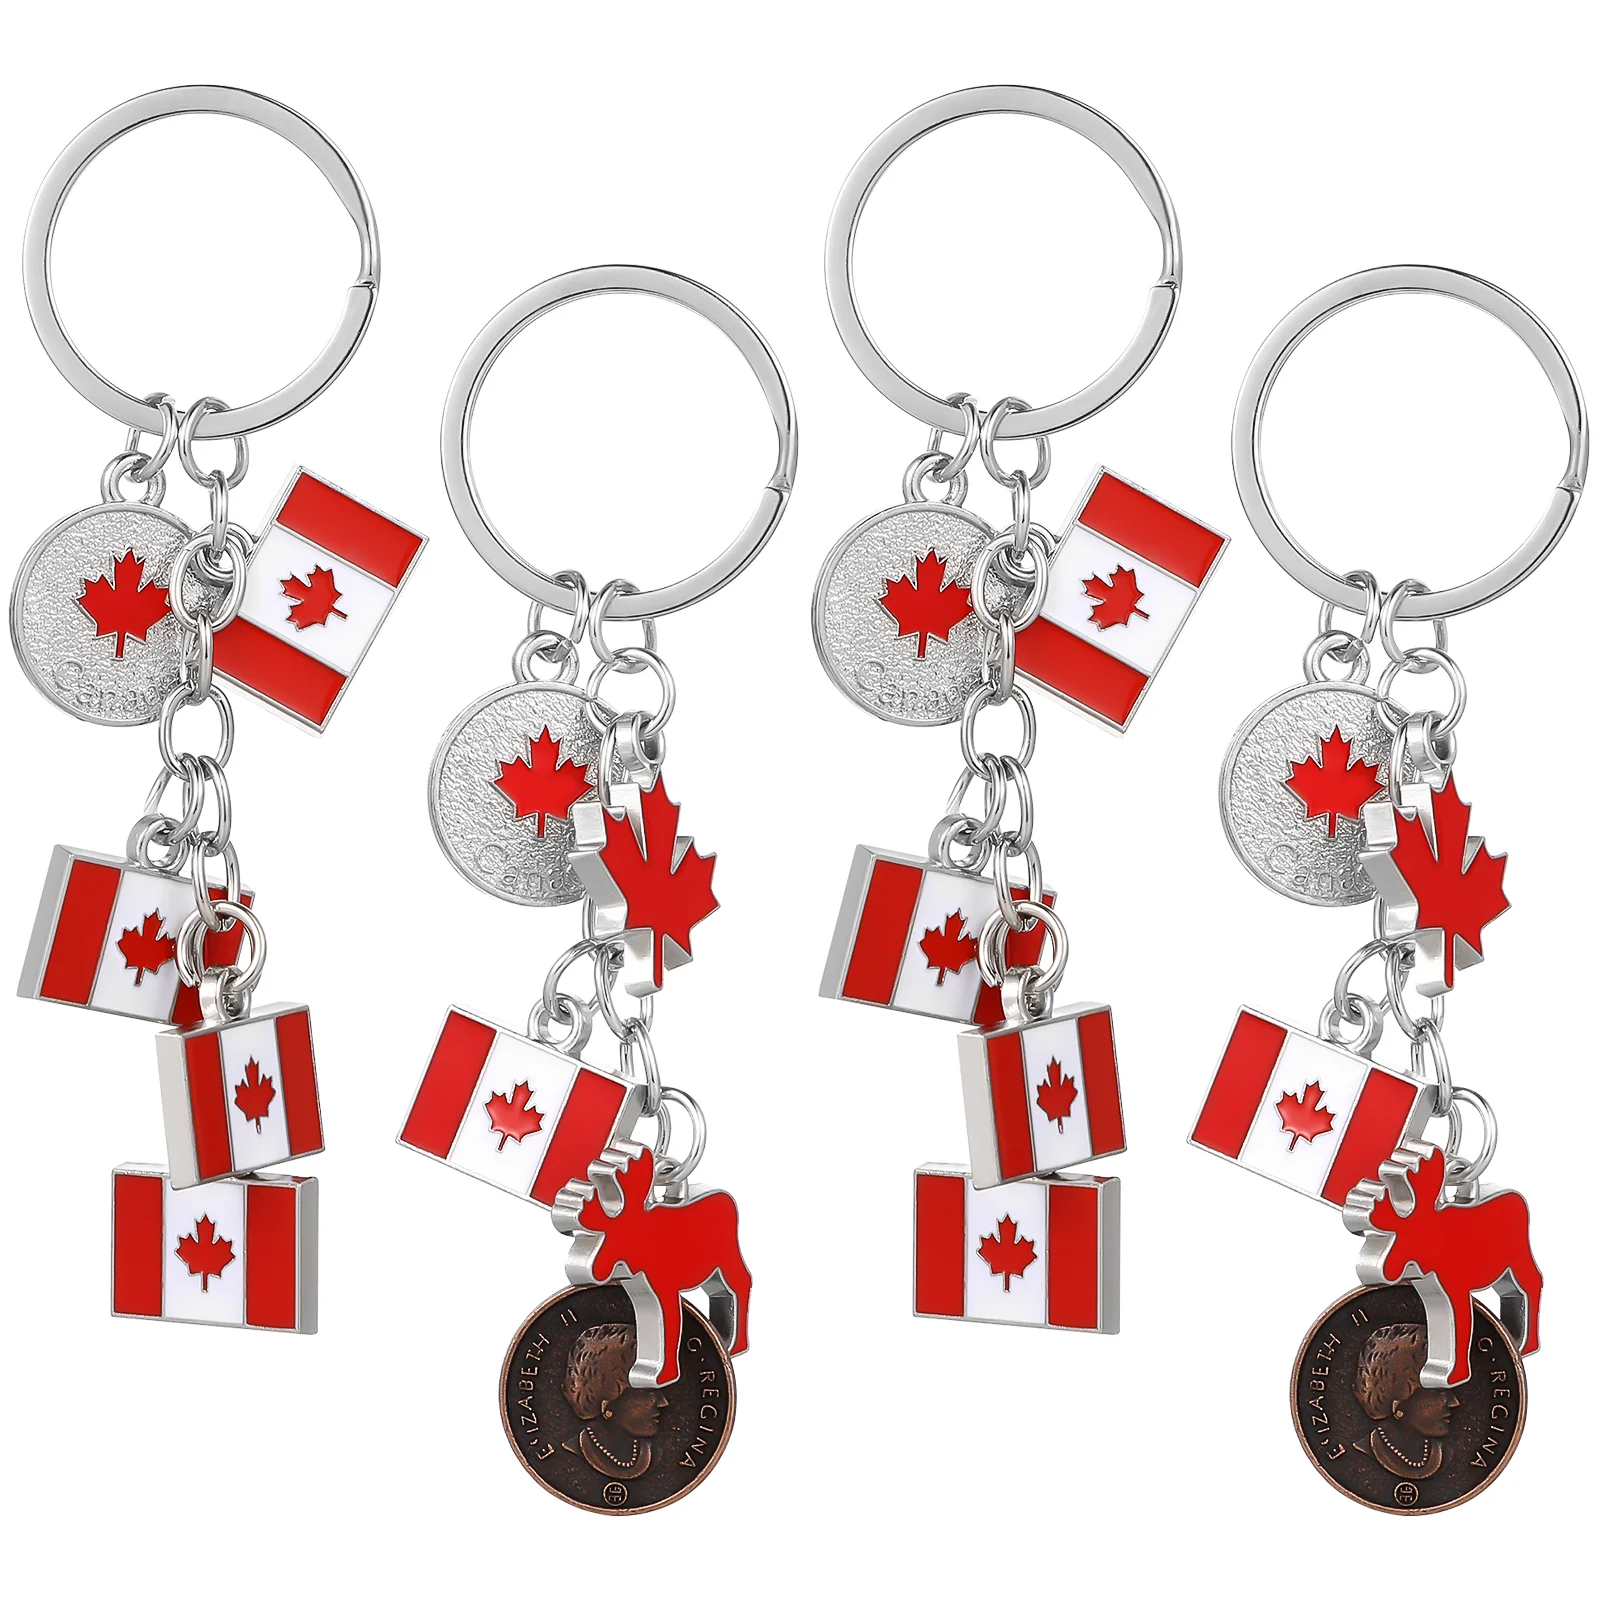 

8 PCS Canadian National Flag Keychains Decorative Hanging Keyrings Creative Key Holders Gift for Friends Family Colleague